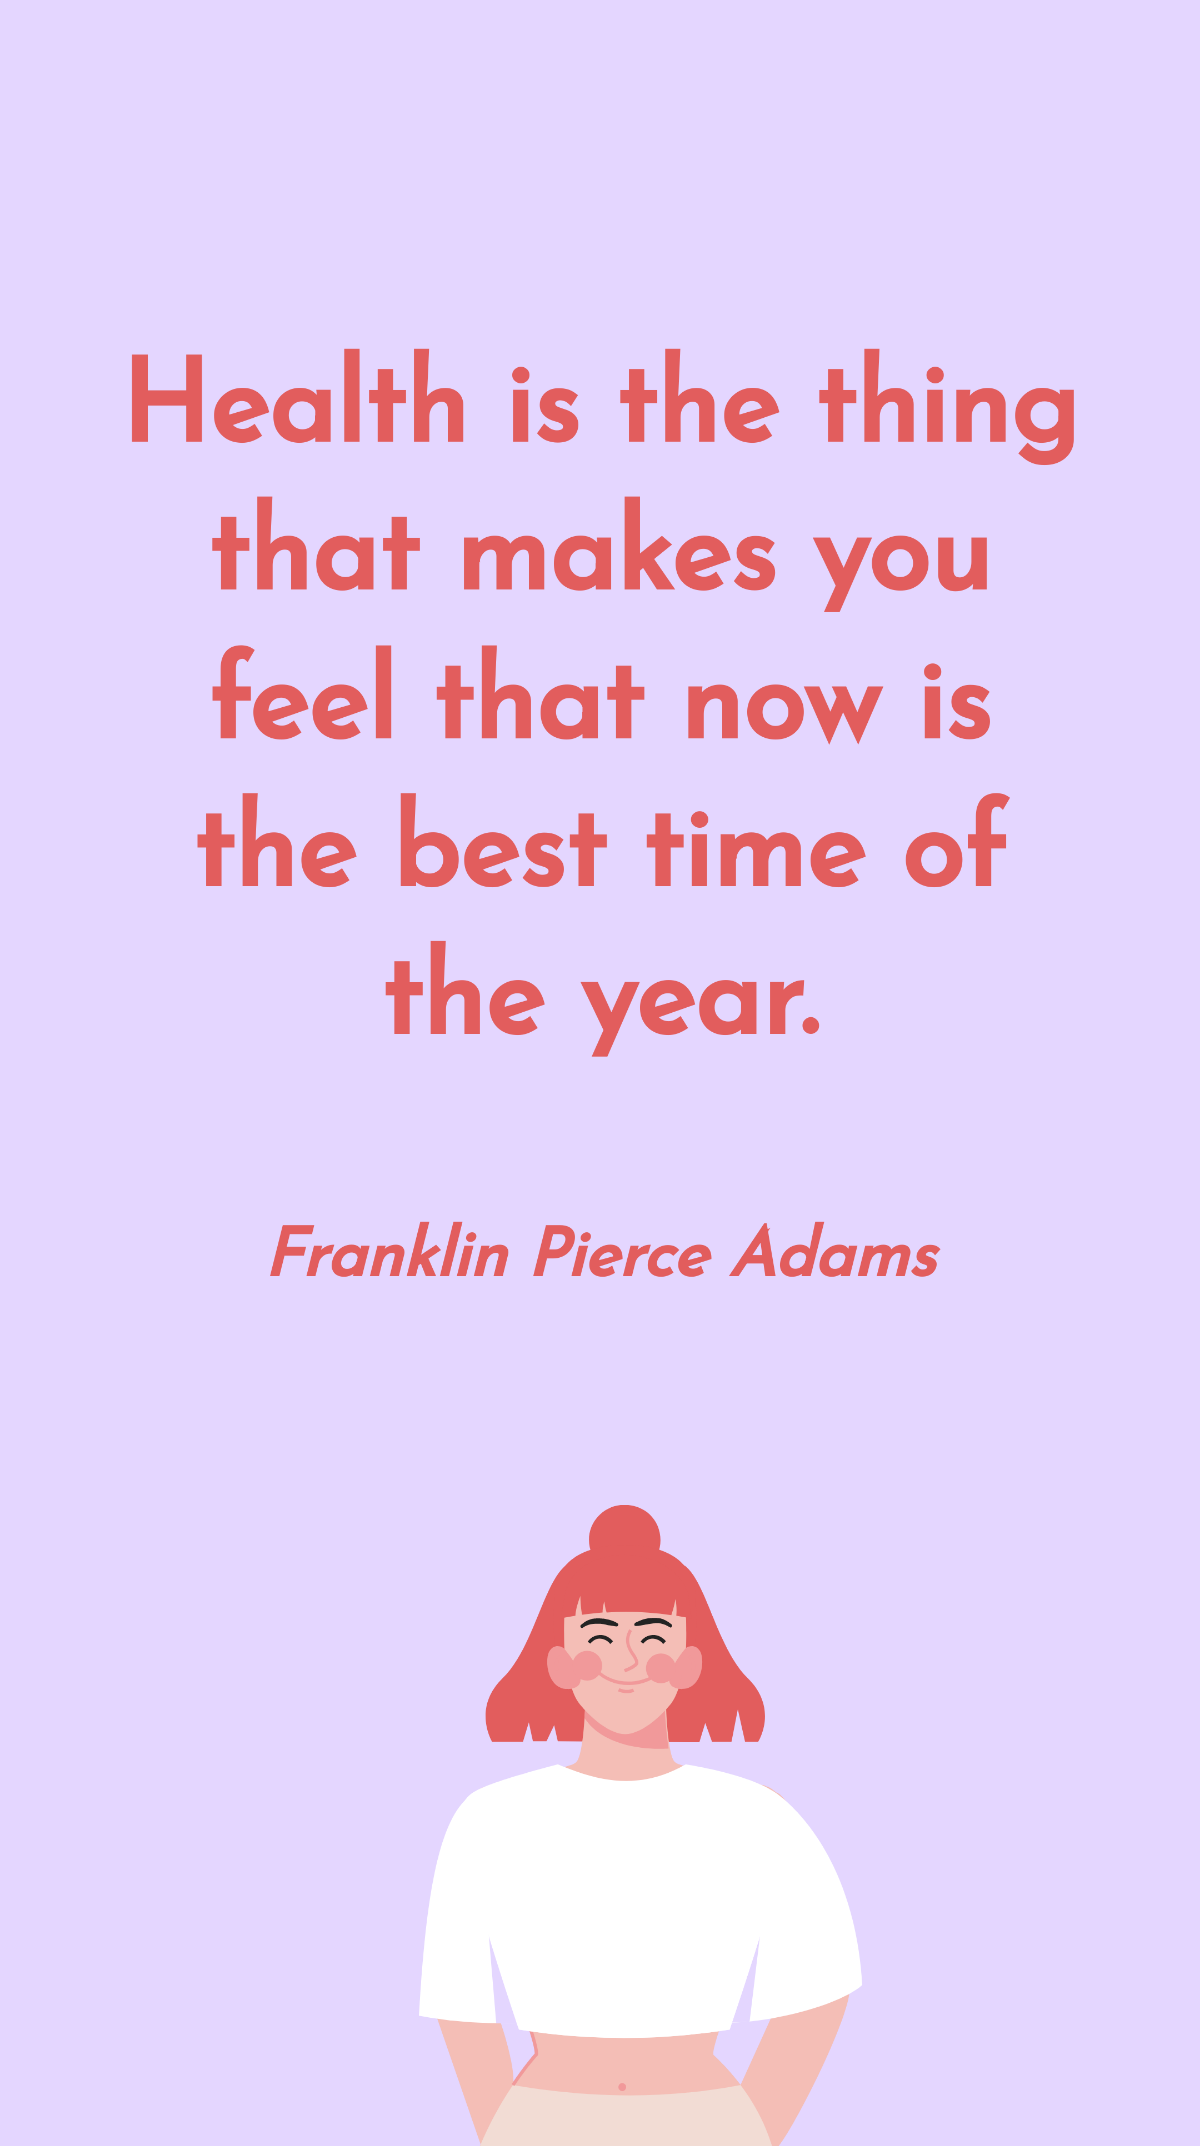 Free Franklin Pierce Adams - Health is the thing that makes you feel that now is the best time of the year. Template